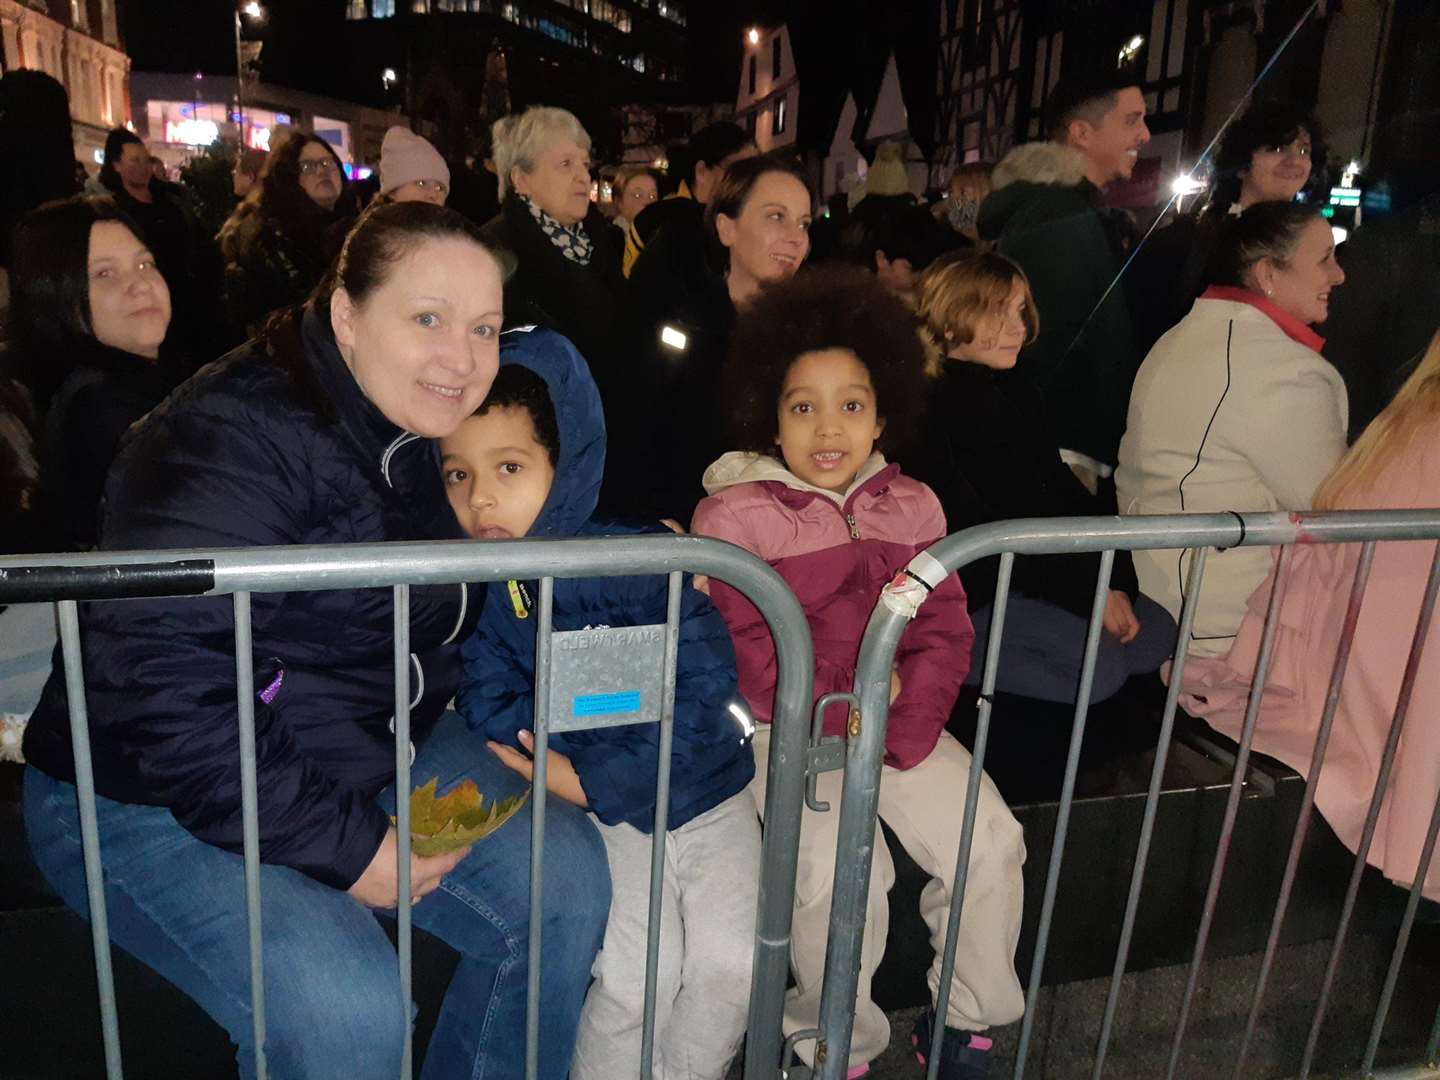 Brothers Nathan and AJ were at the front of the crowd to see X-mas switch on hosts kmfm's Garry and Claire, who they are big fans of